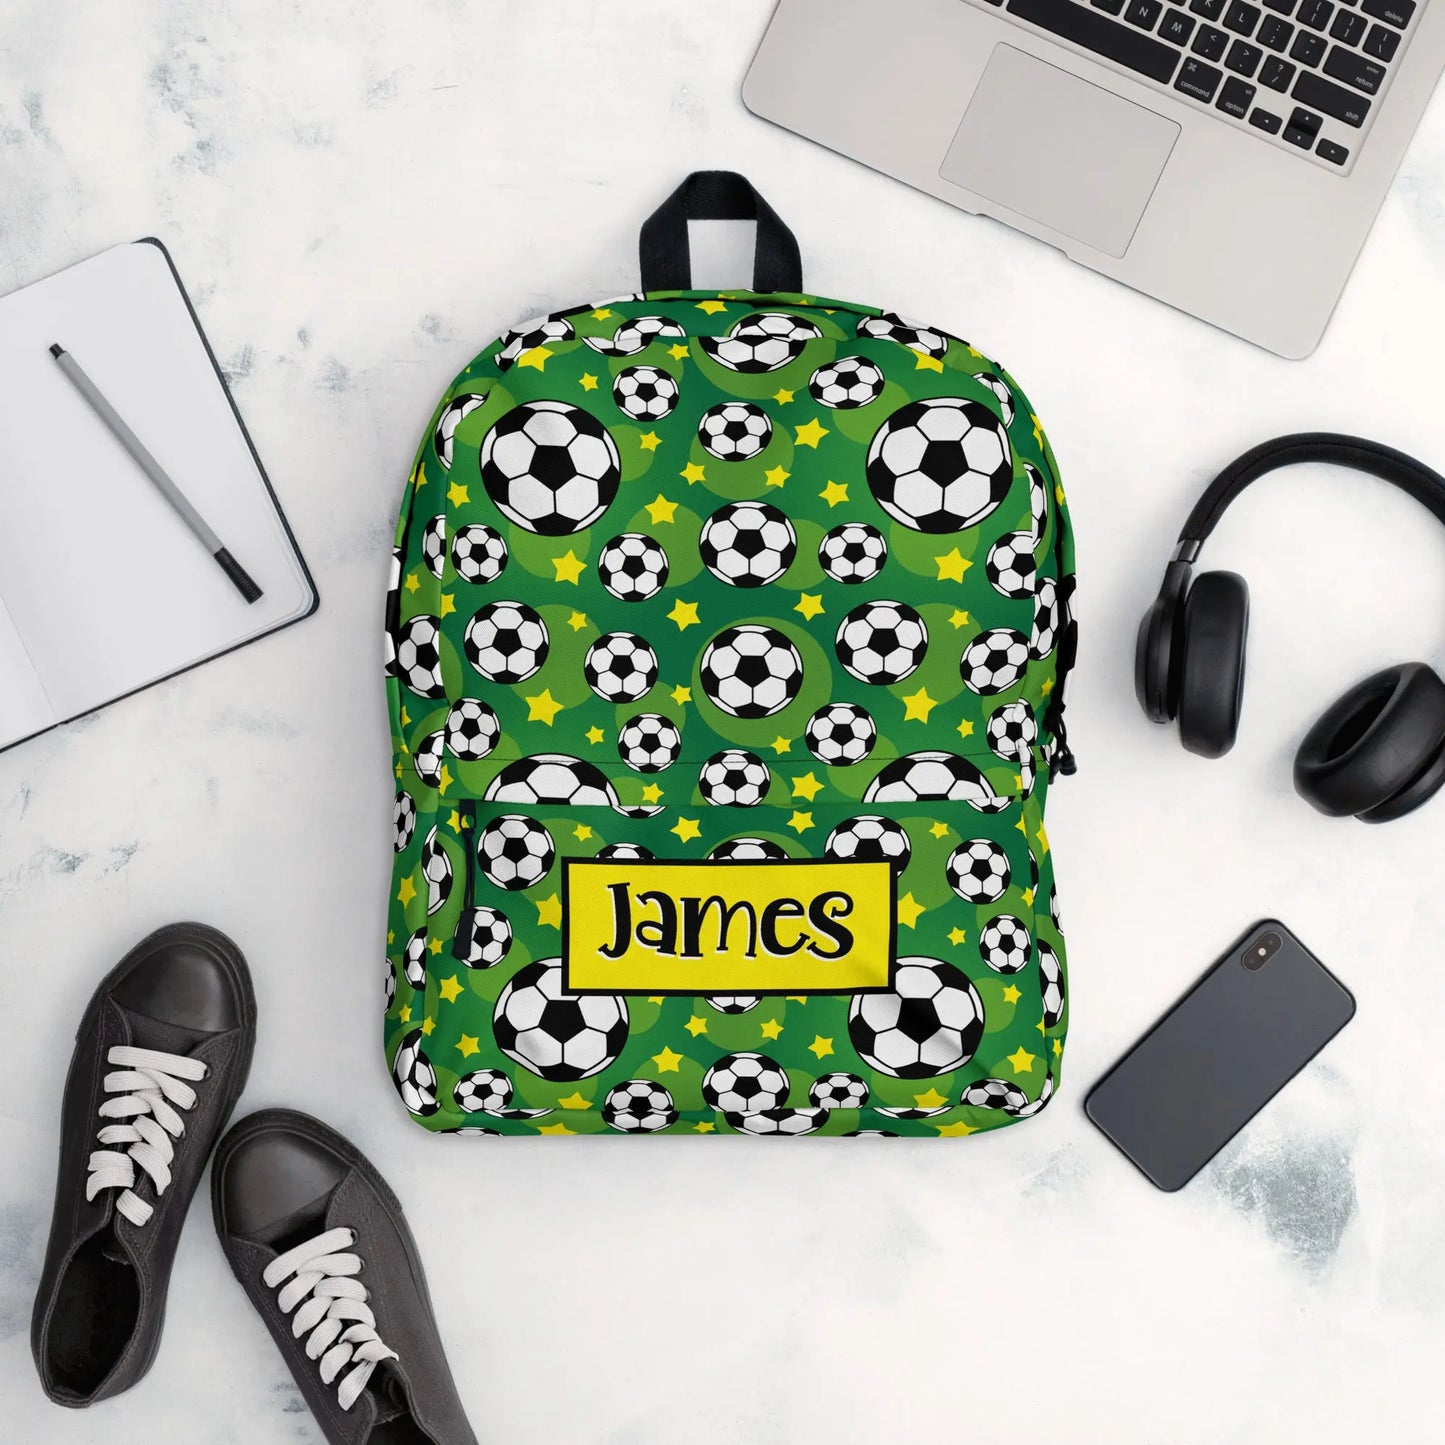 Soccer Personalized Backpack Amazing Faith Designs